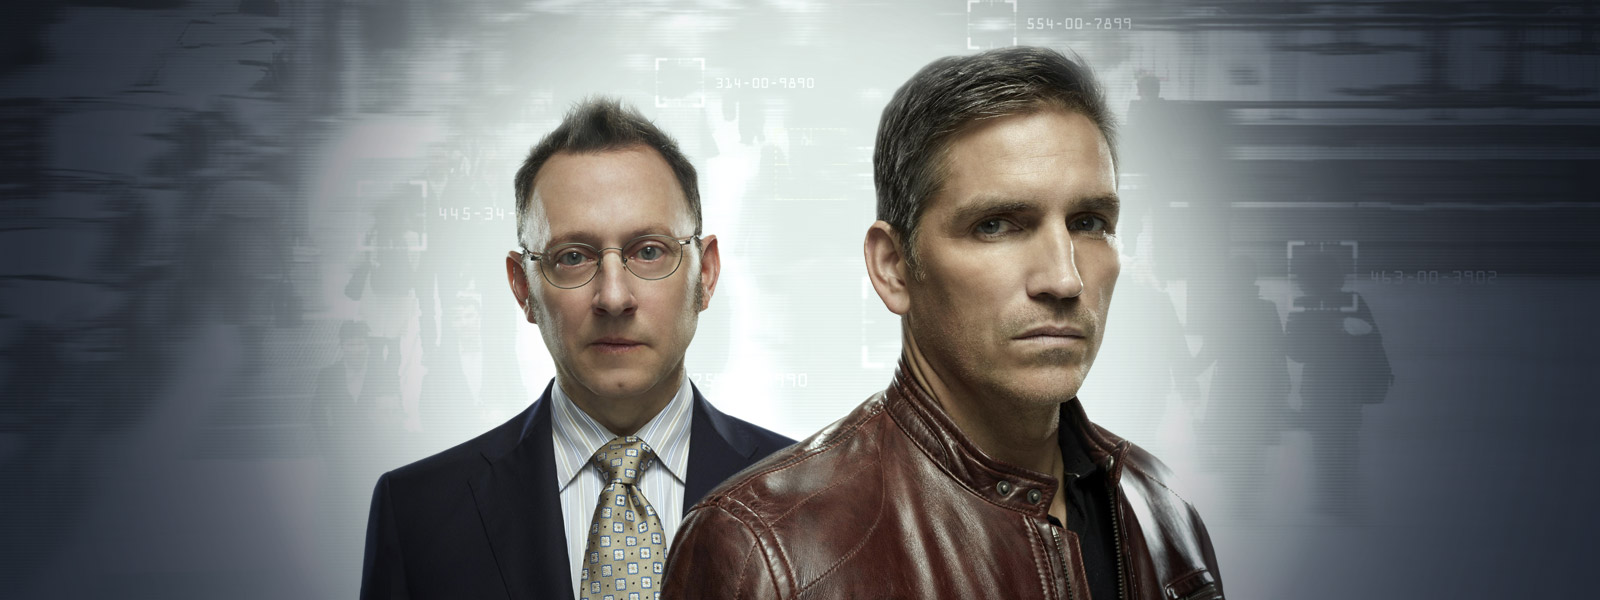 Review: Person of Interest 4.14- “Guilty”